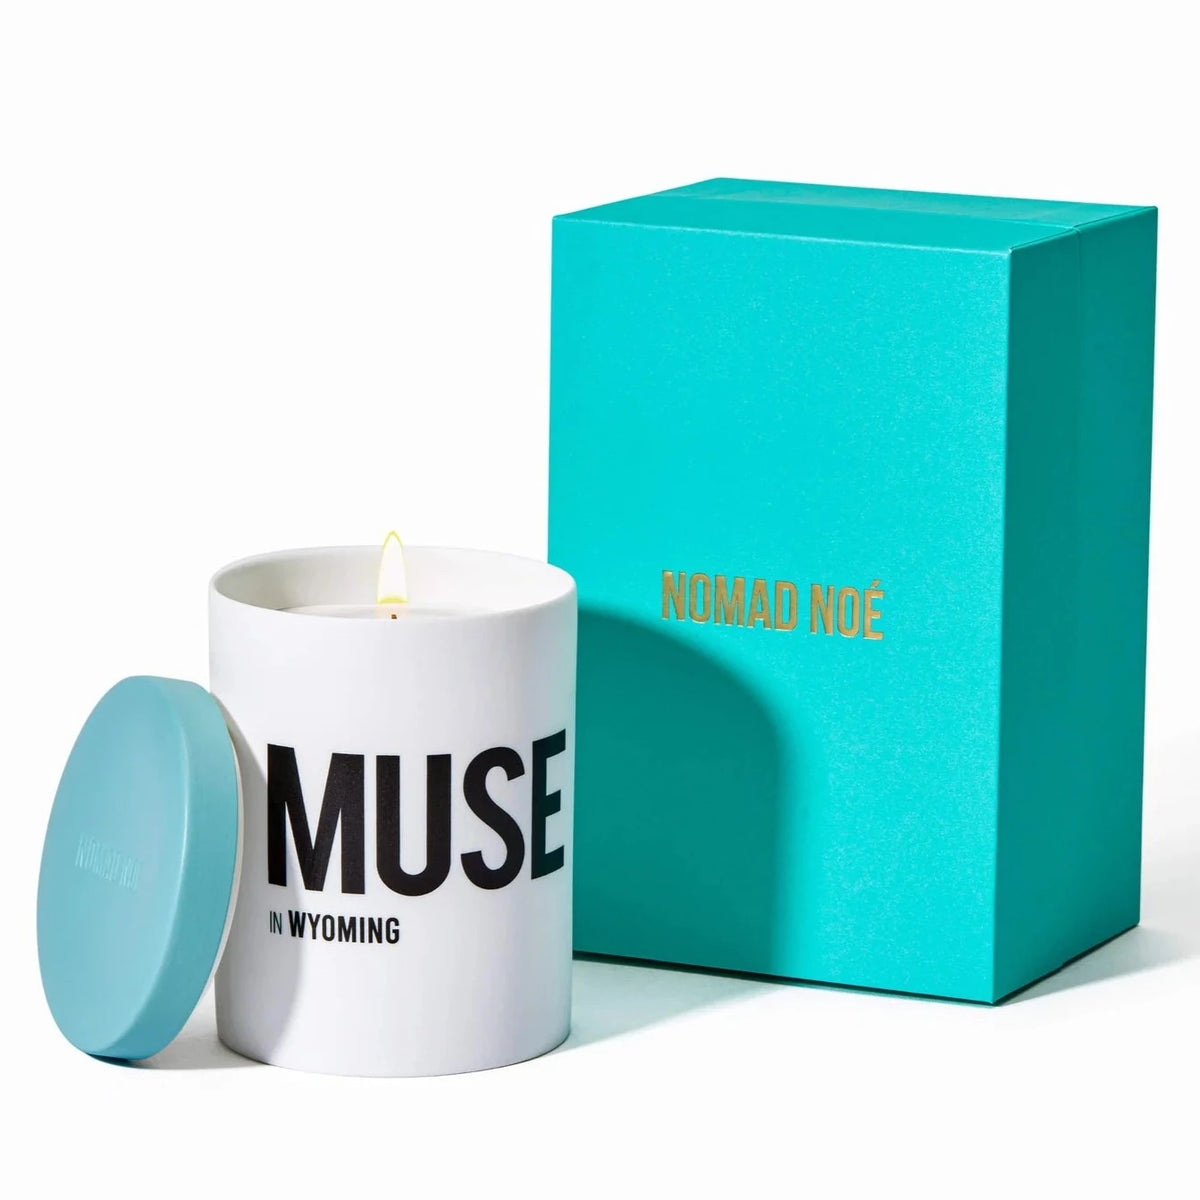 Nomad Noe Candle - MUSE in Wyoming